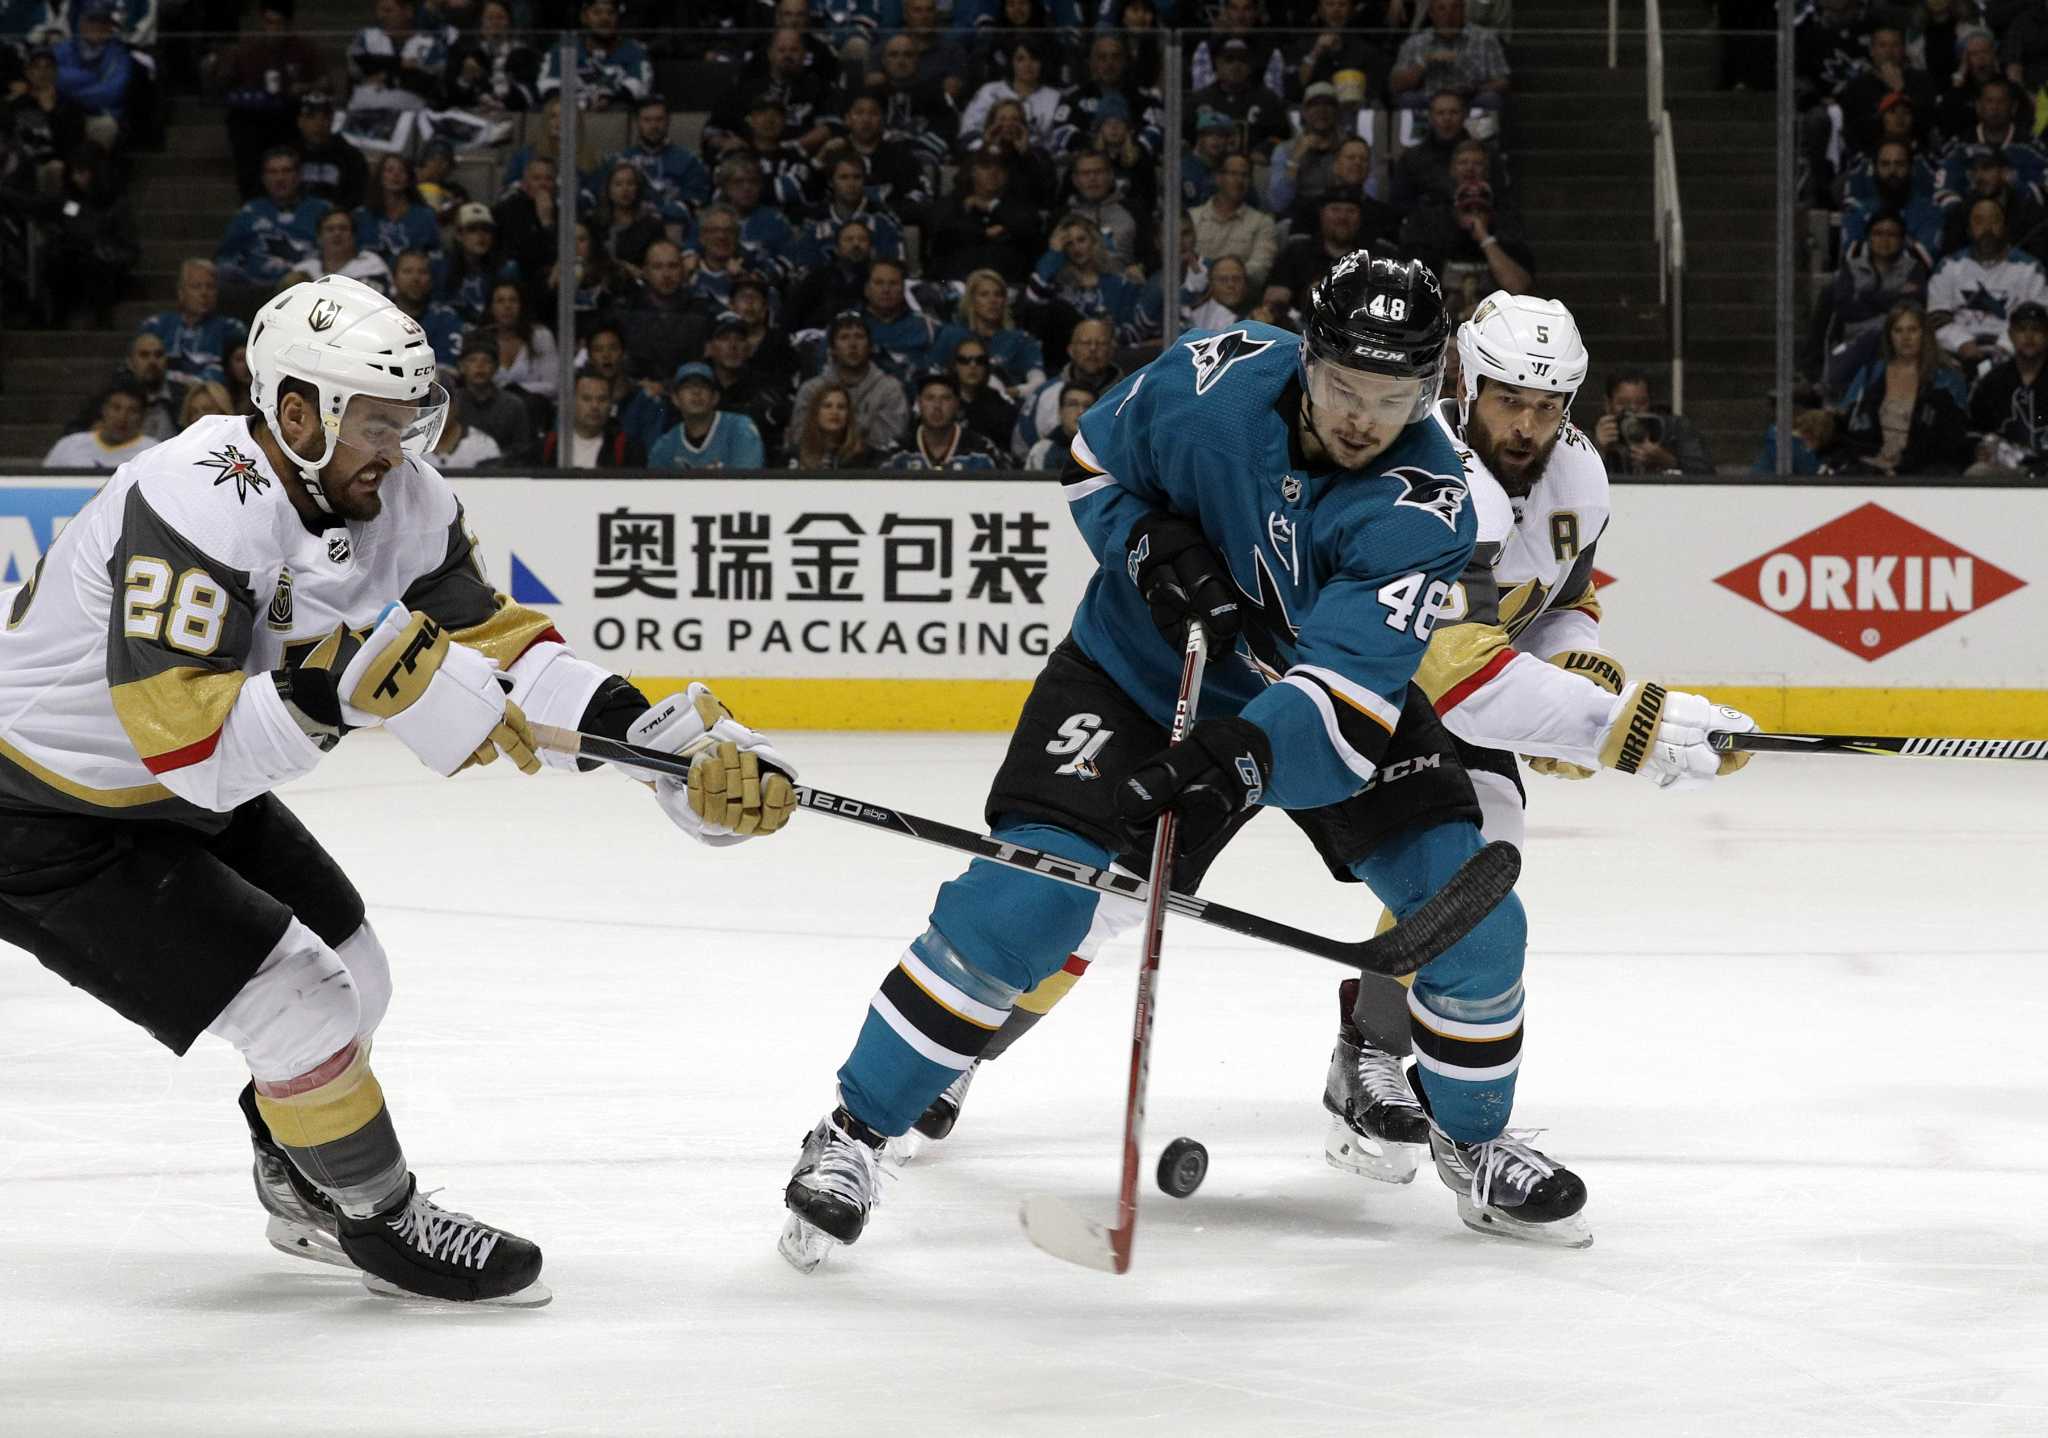 Defense, including top-notch penalty kill, helps Sharks even series